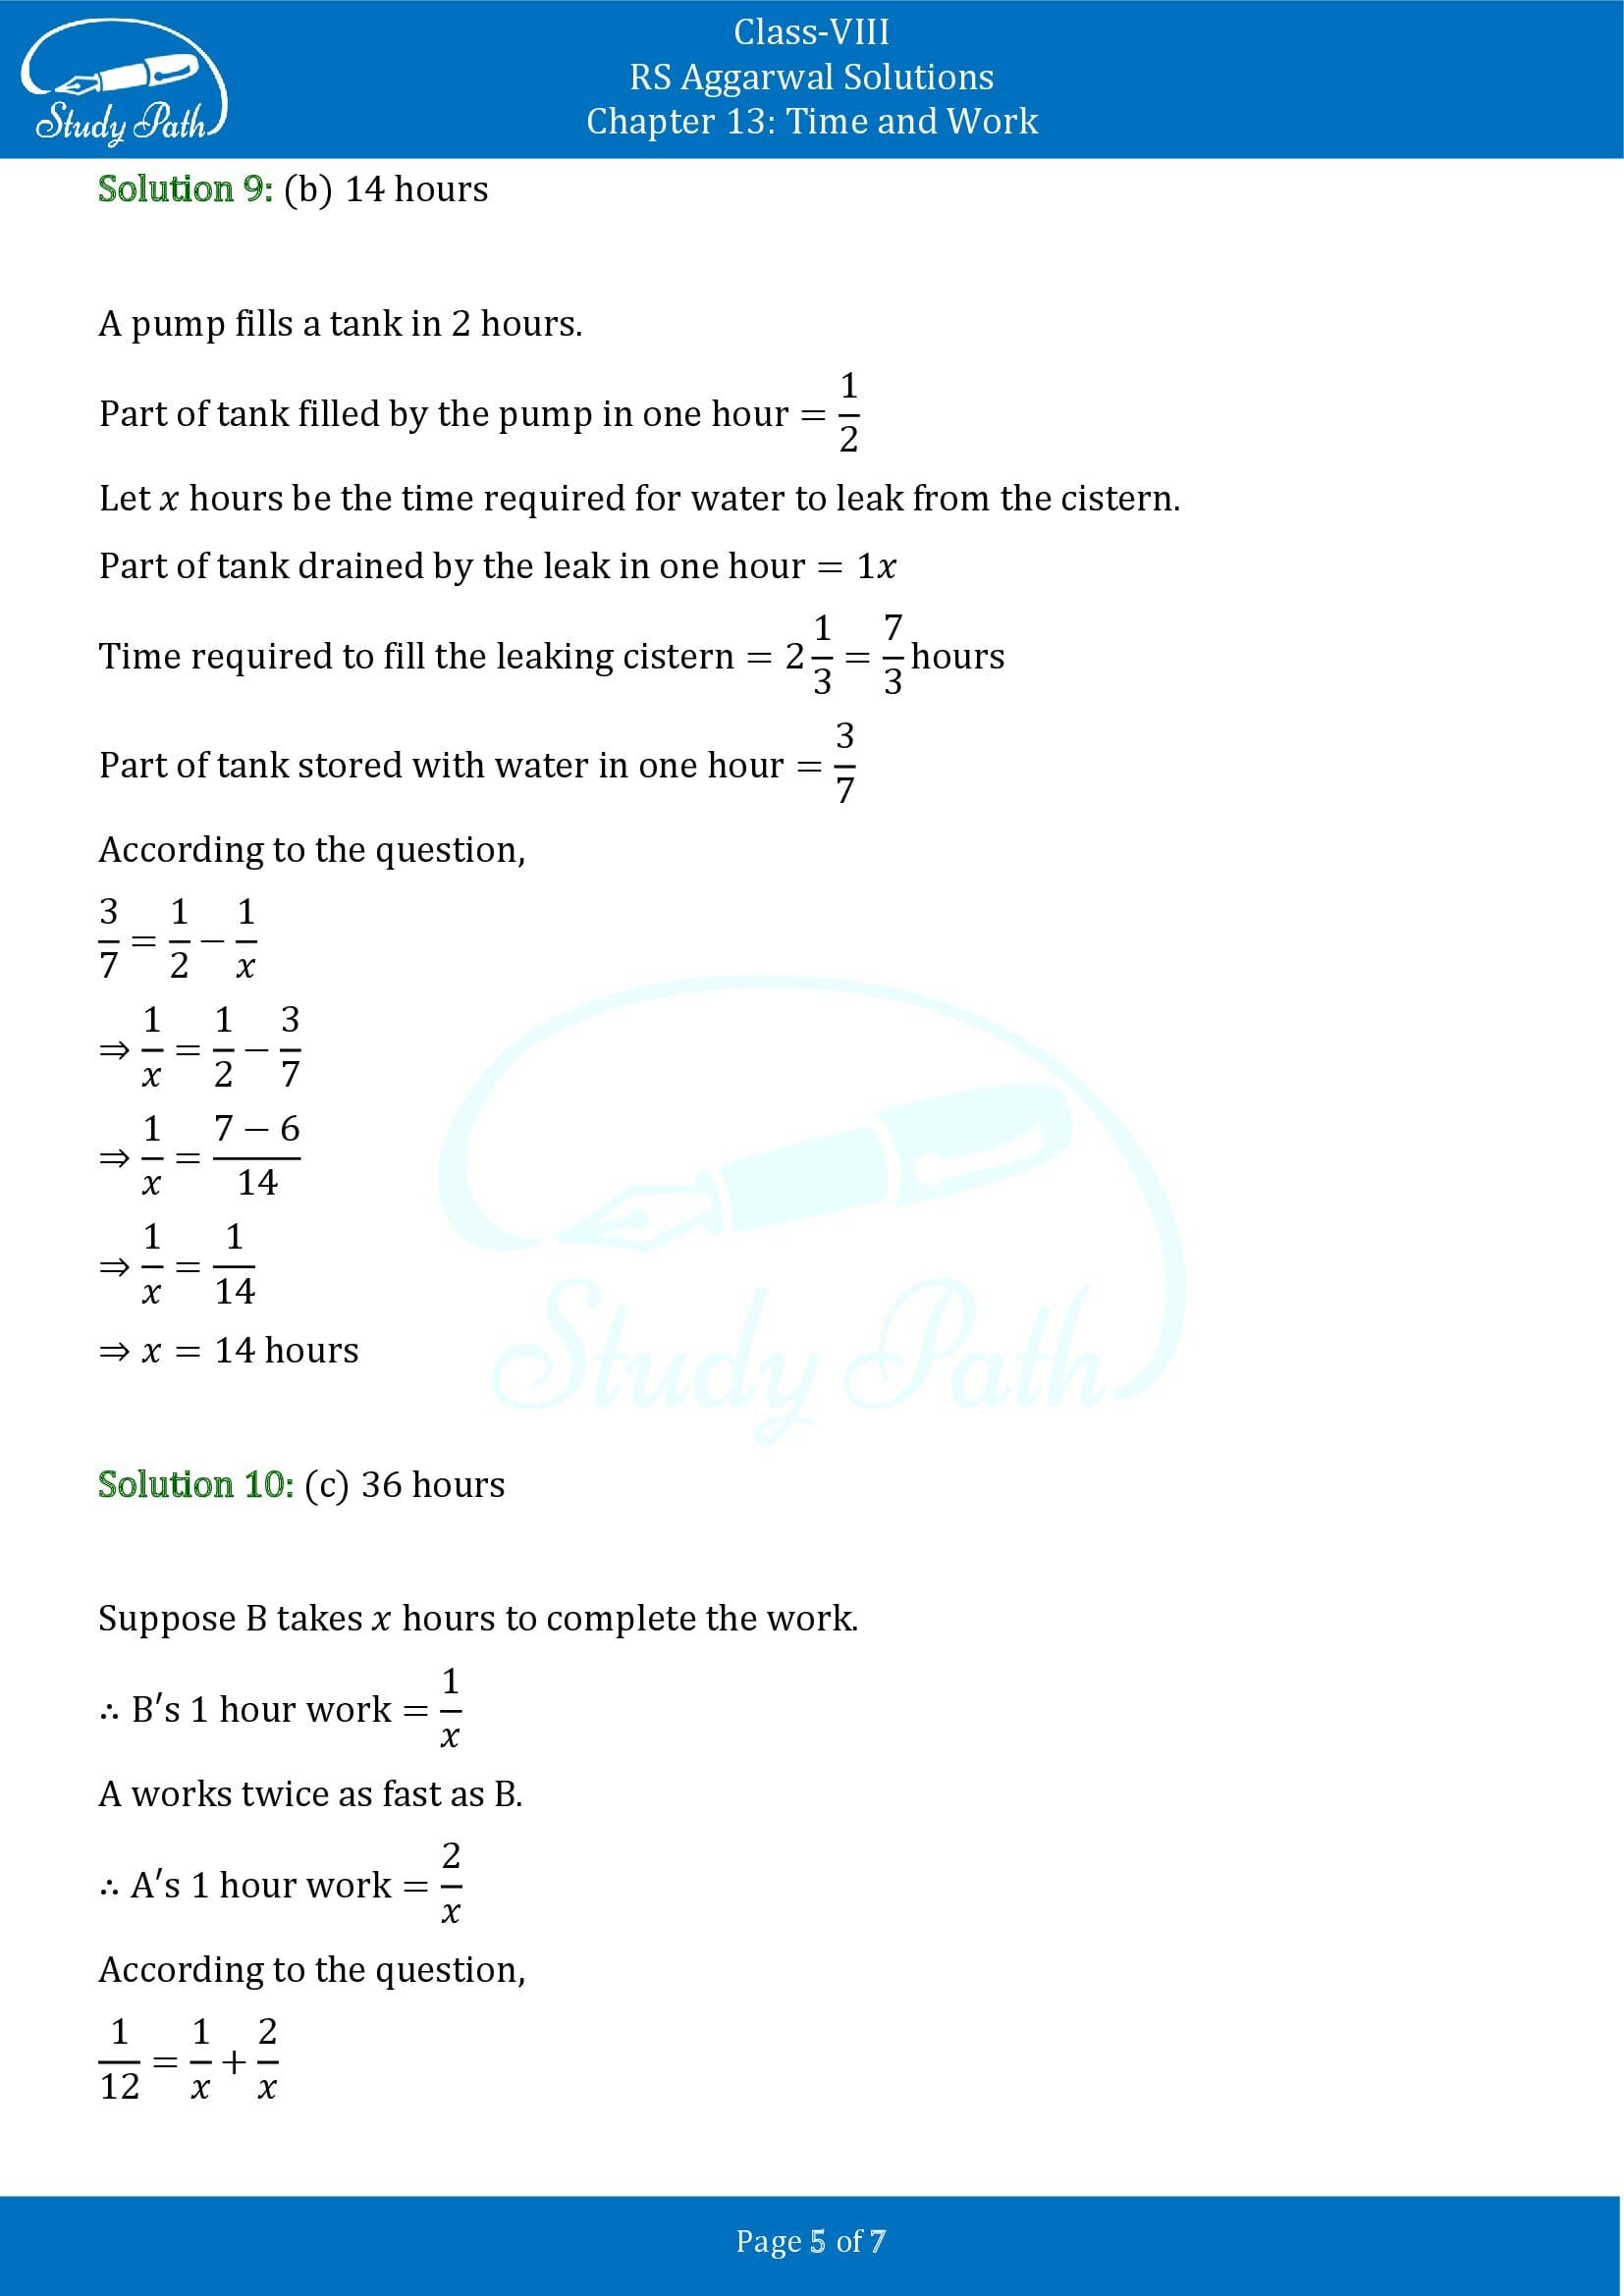 RS Aggarwal Solutions Class 8 Chapter 13 Time and Work Test Paper 00005